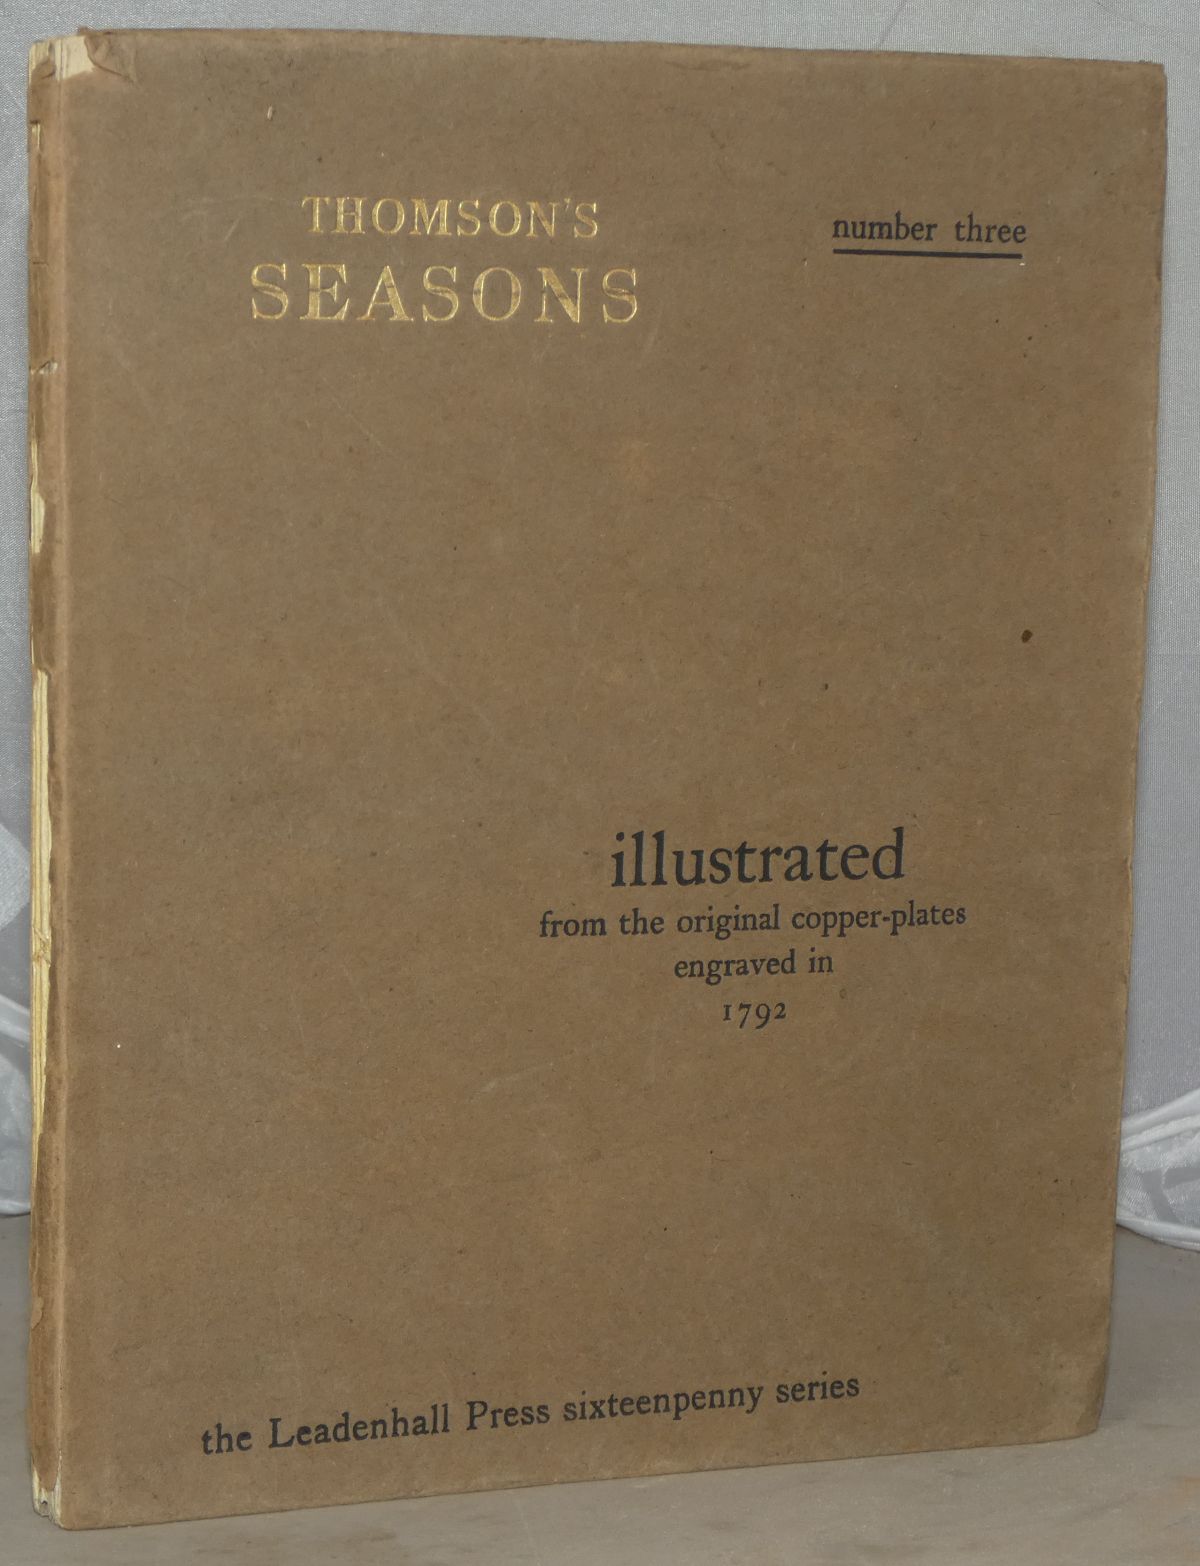 Image for The Seasons, with Four Illustrations and Extra Portrait Printed Direct from the Original Copper-Plates Engraved in 1792 [The Leadenhall Press Sixteenpenny Series. Illustrated Gleanings from the Classics. Number 3.]